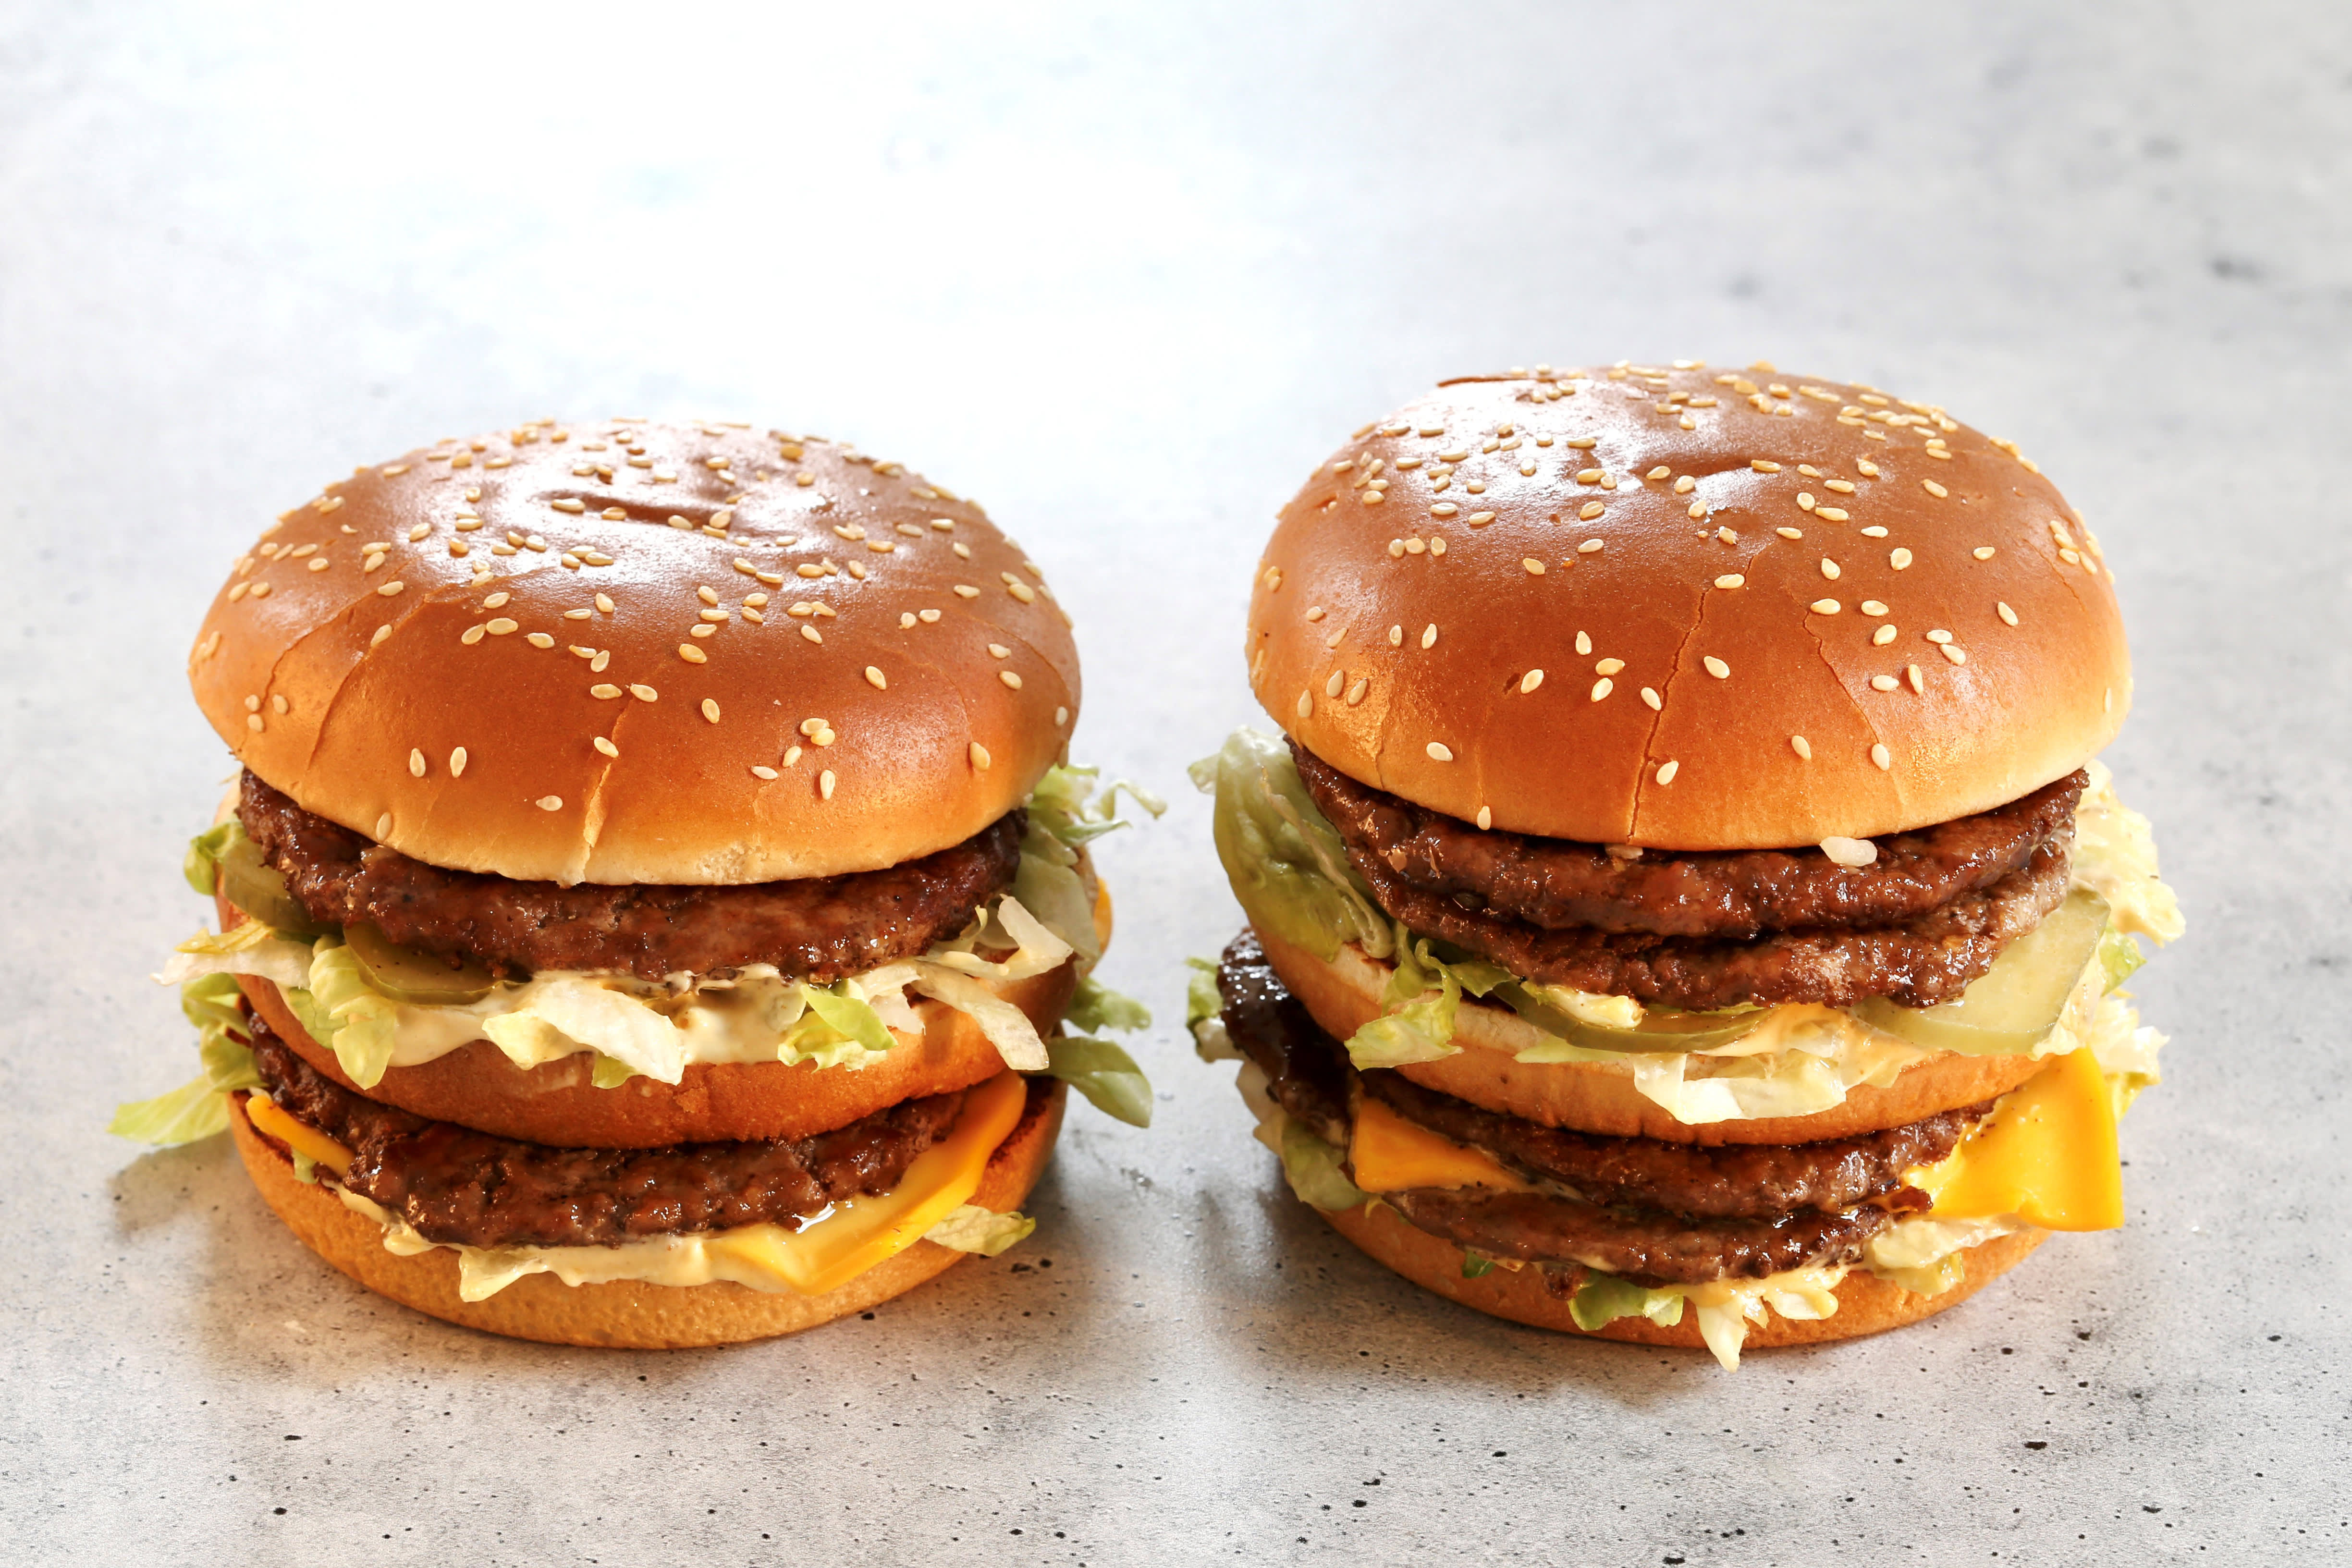 McDonald's launches 'best burger' ahead of earnings report